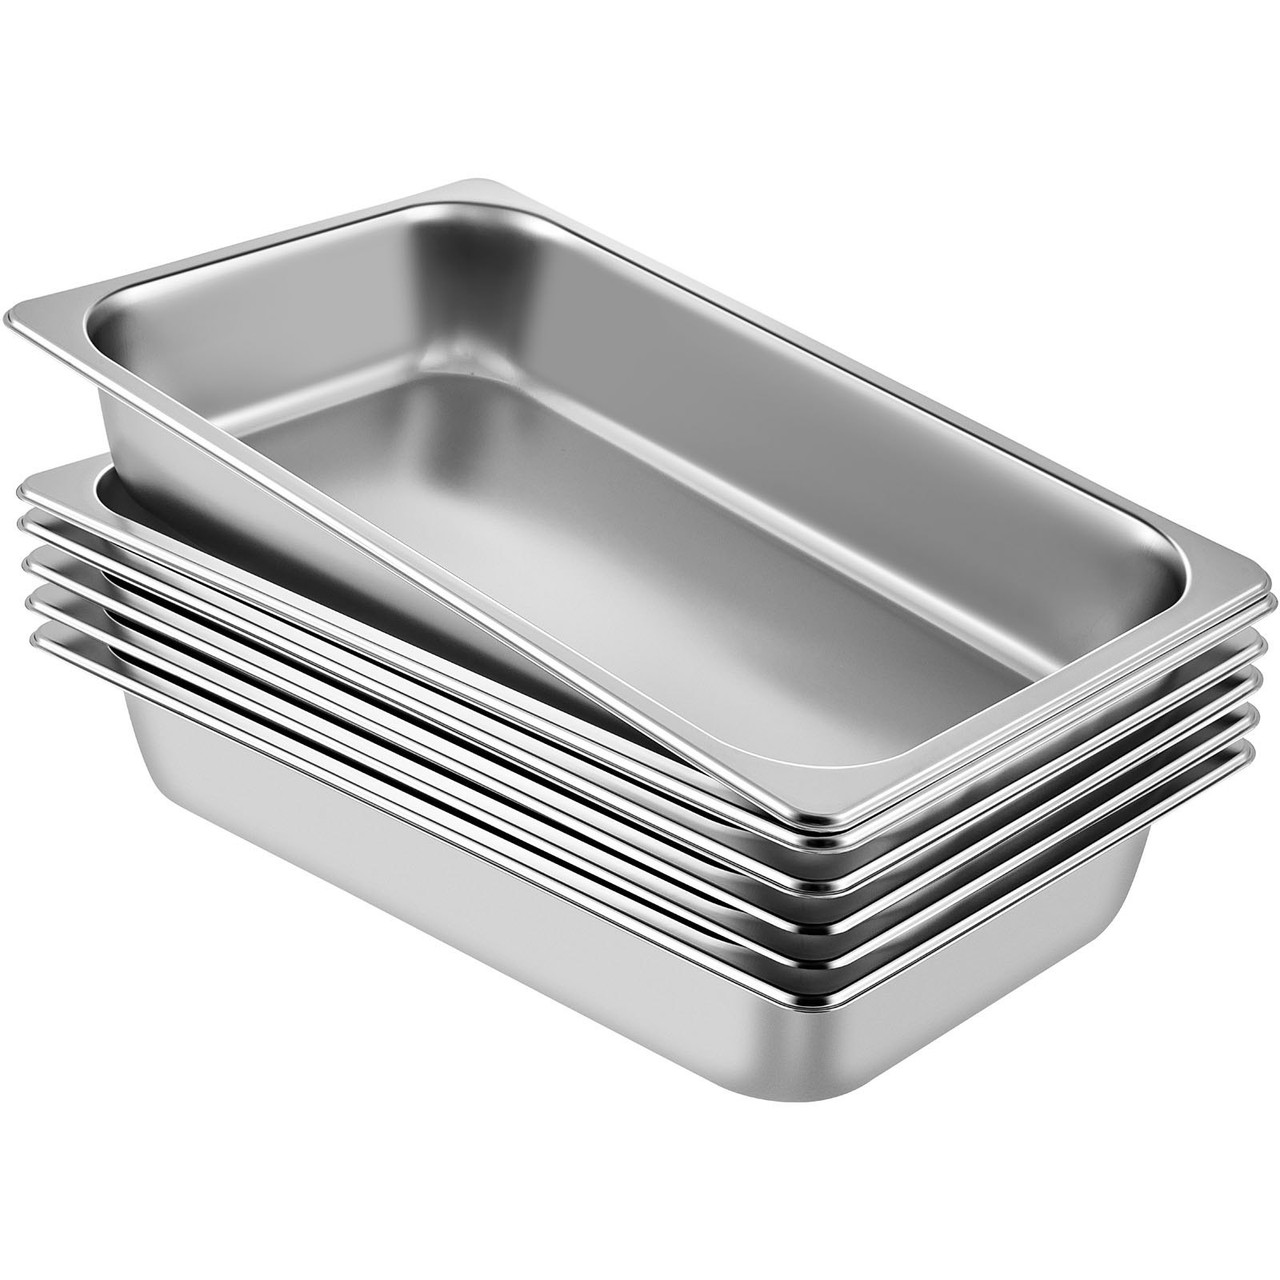 Hotel Pans Full Size 4-Inch Deep, Steam Table Pan 6 Pack , 22 Gauge/0.8mm Thick Stainless Steel Full Size Hotel Pan Anti Jam Steam Table Pan